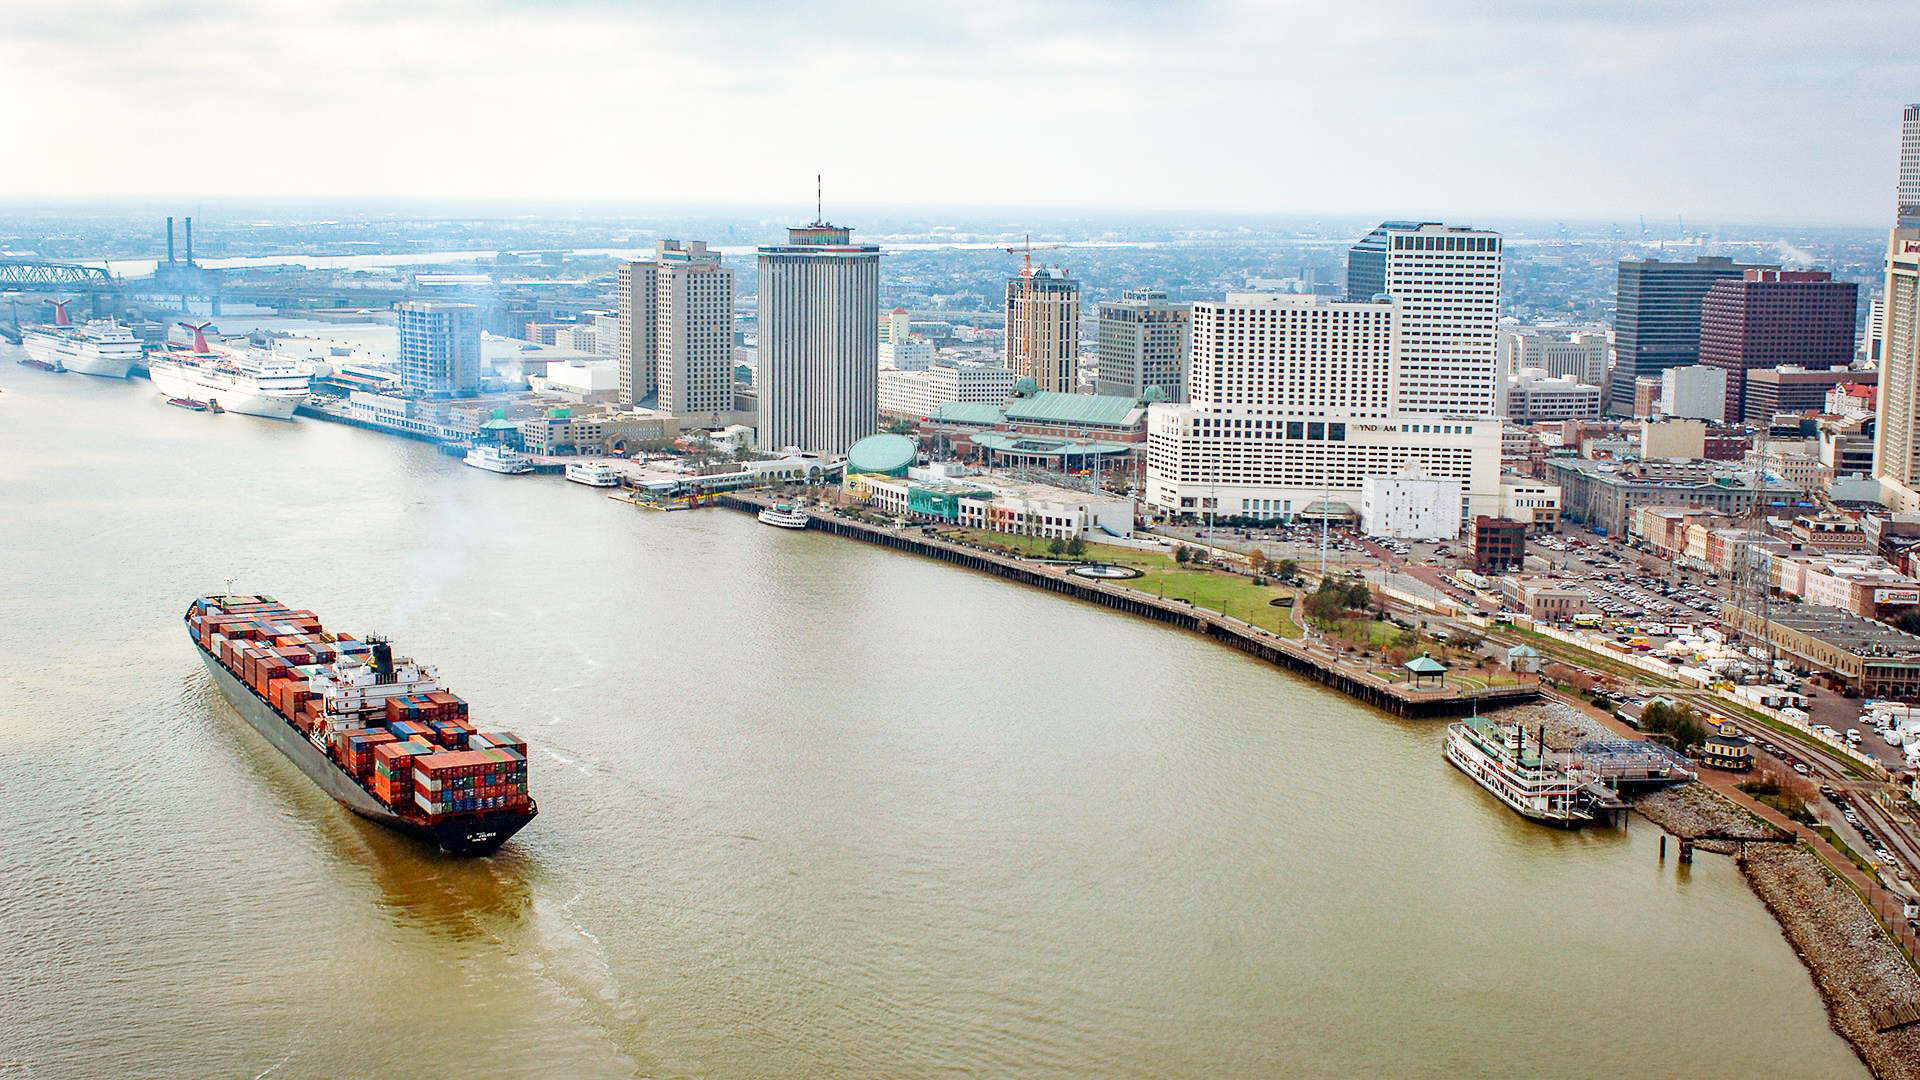 Aerial view of a container ship on the Mississippi River